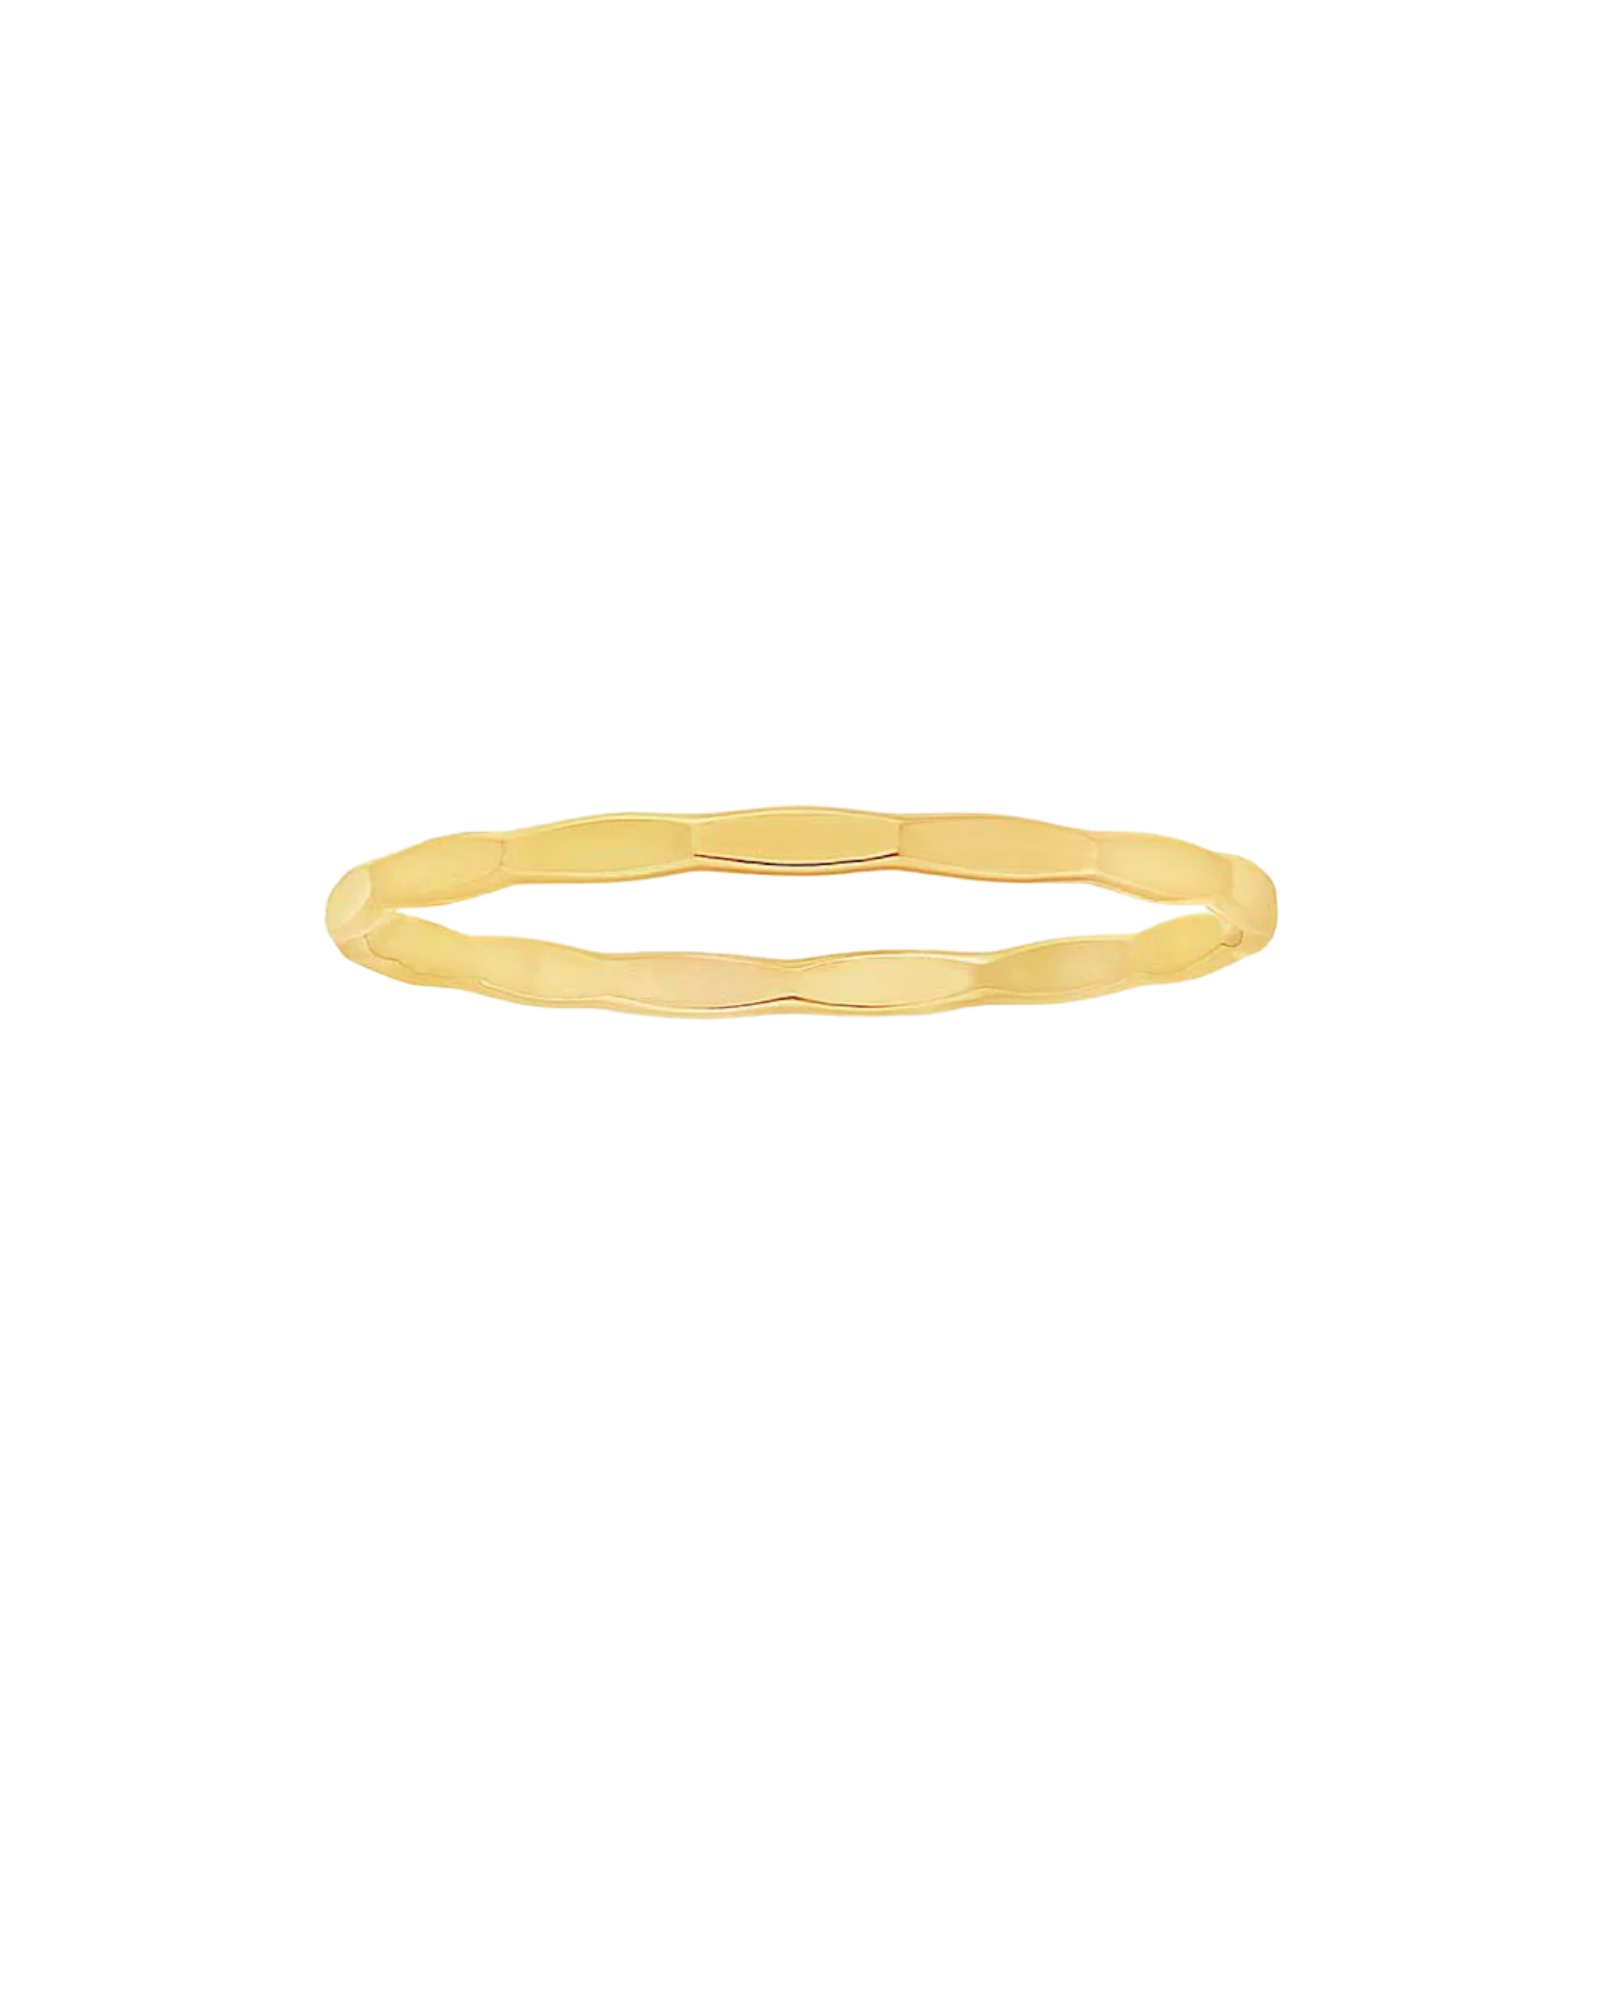 Textured Hammered Thin Band Ring In 14K Gold Filled